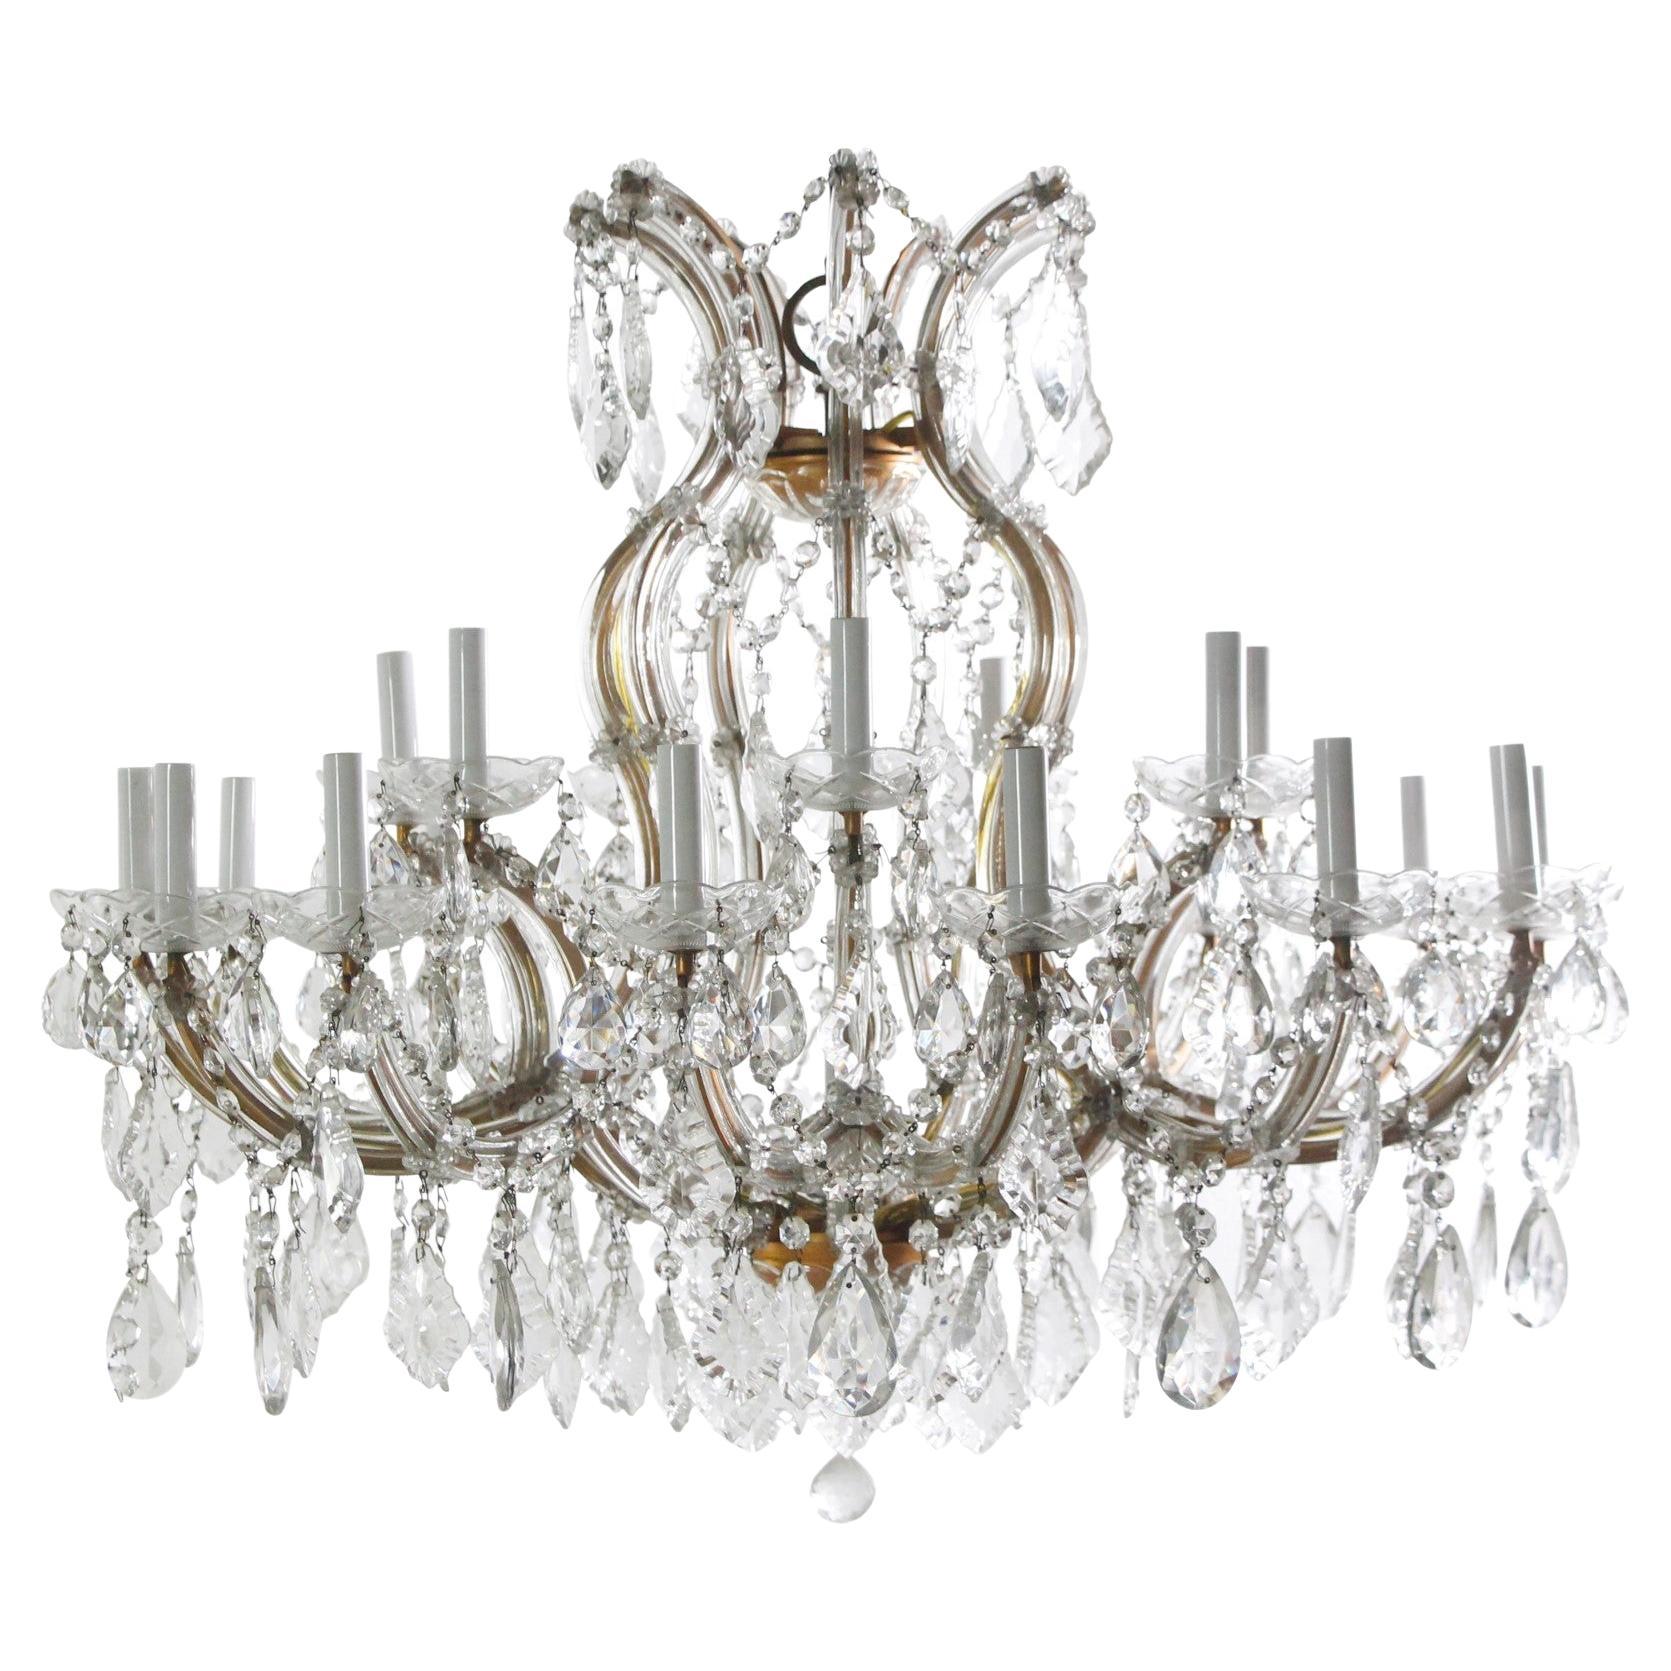 Marie Therese Crystal Chandelier Grand Prospect Hall Brooklyn, NY w/ 22 Lights